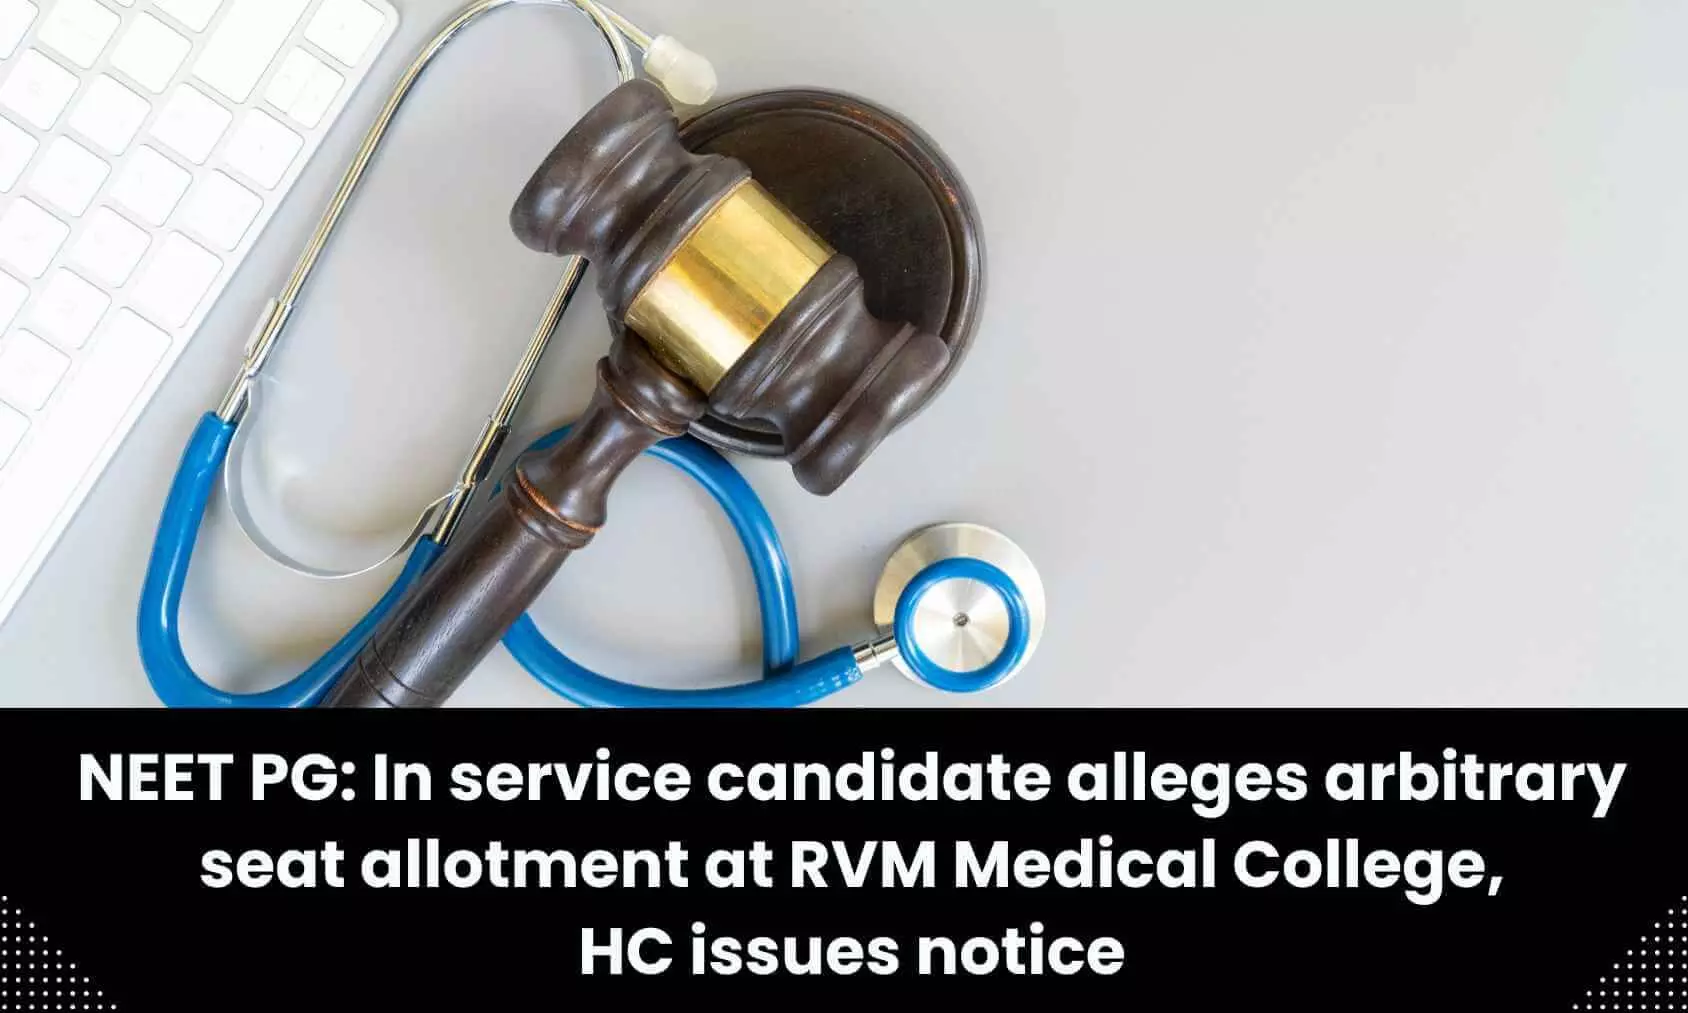 NEET PG: In service candidate alleges arbitrary seat allotment at RVM Medical College, High Court issues notice